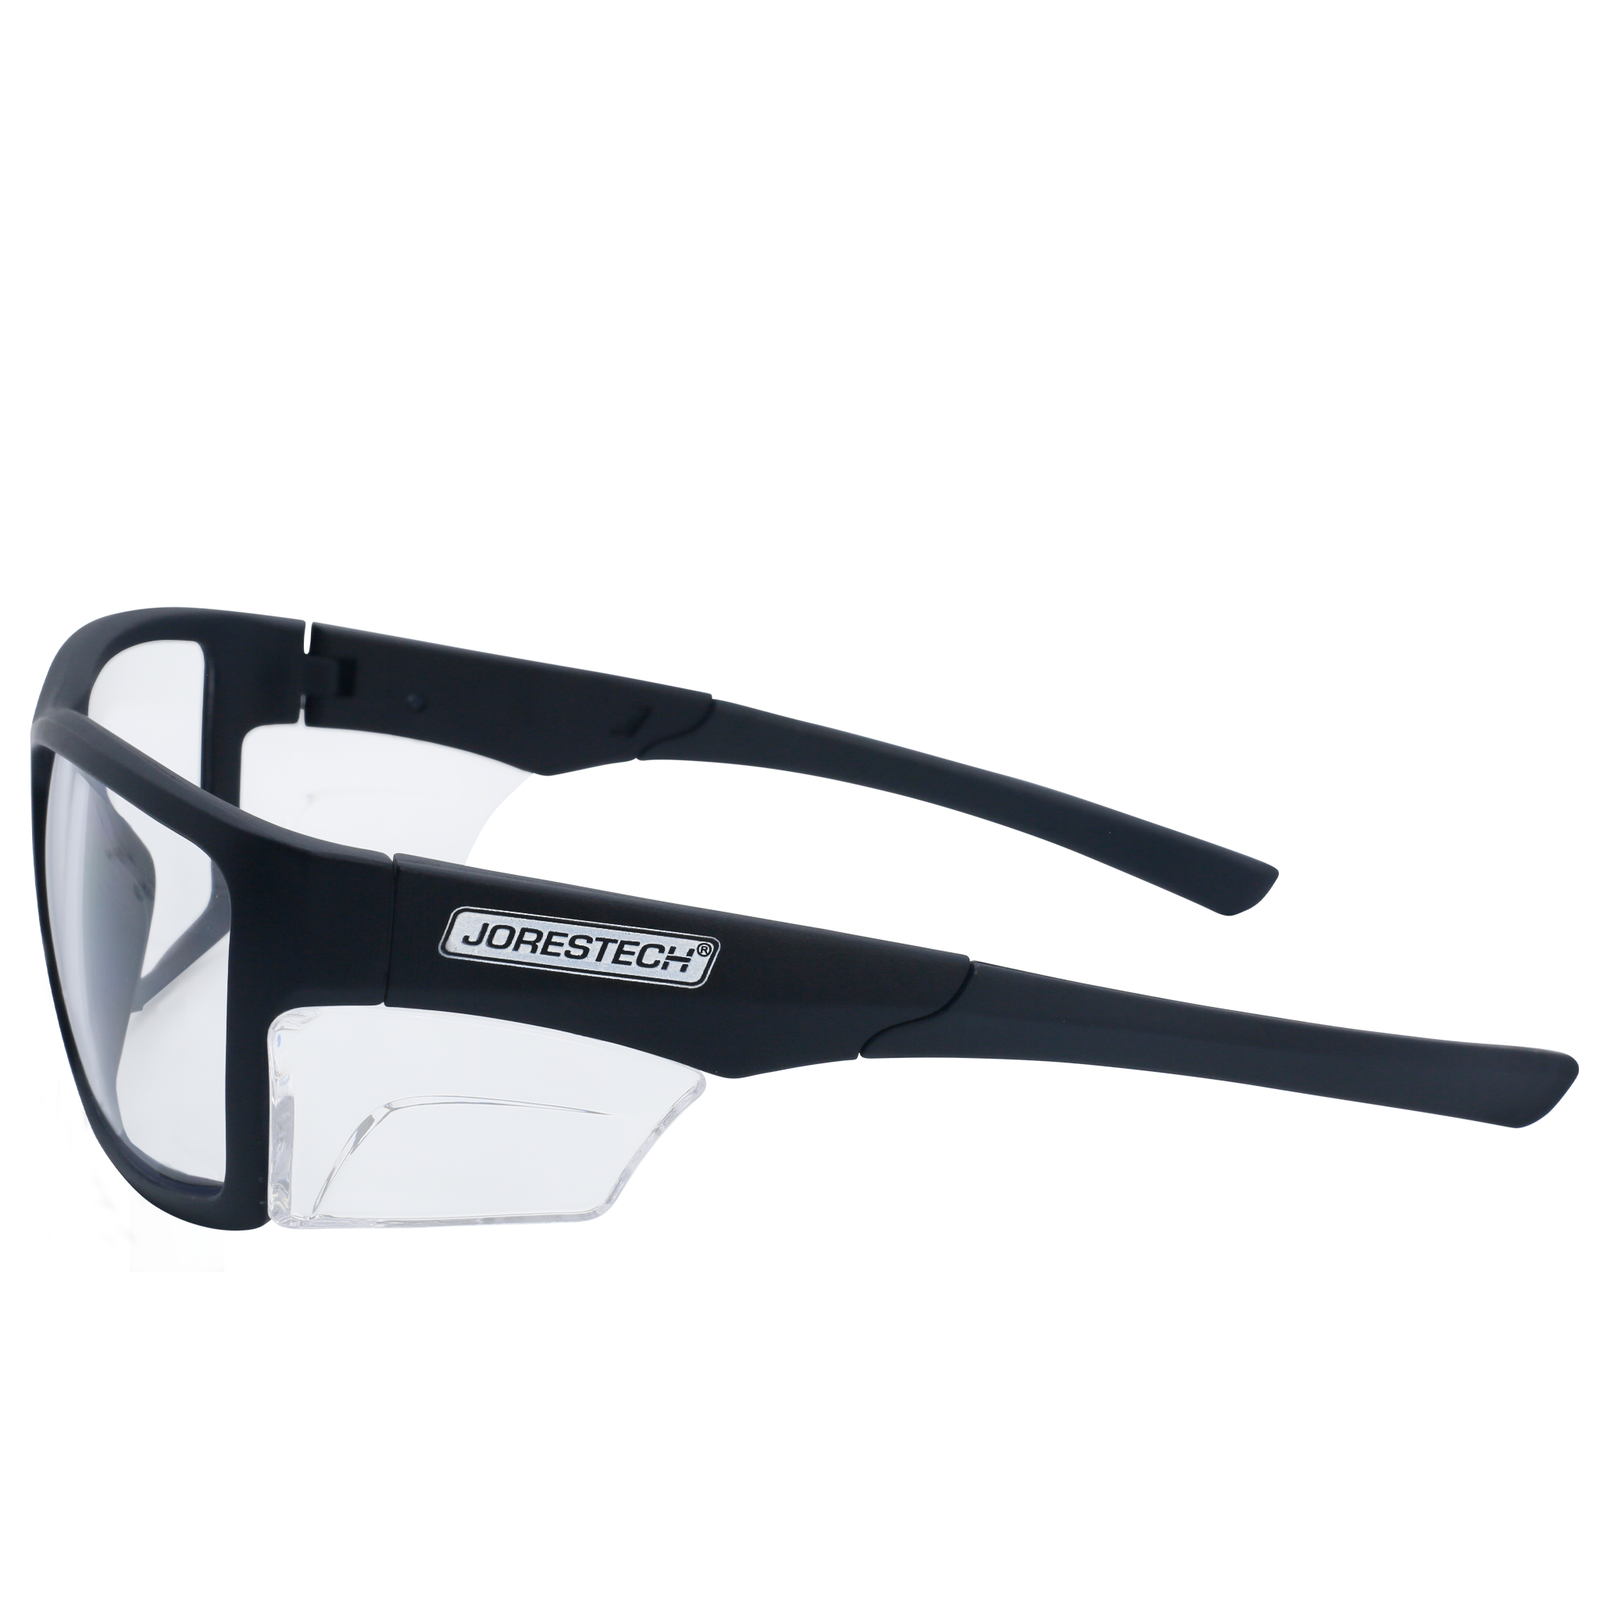 Image shows a side view of a JORESTECH safety Glass with clear side shield for high impact protection. These safety glasses with clear side shields  are ANSI and have black frame and clear polycarbonate lenses. The background of the image is white